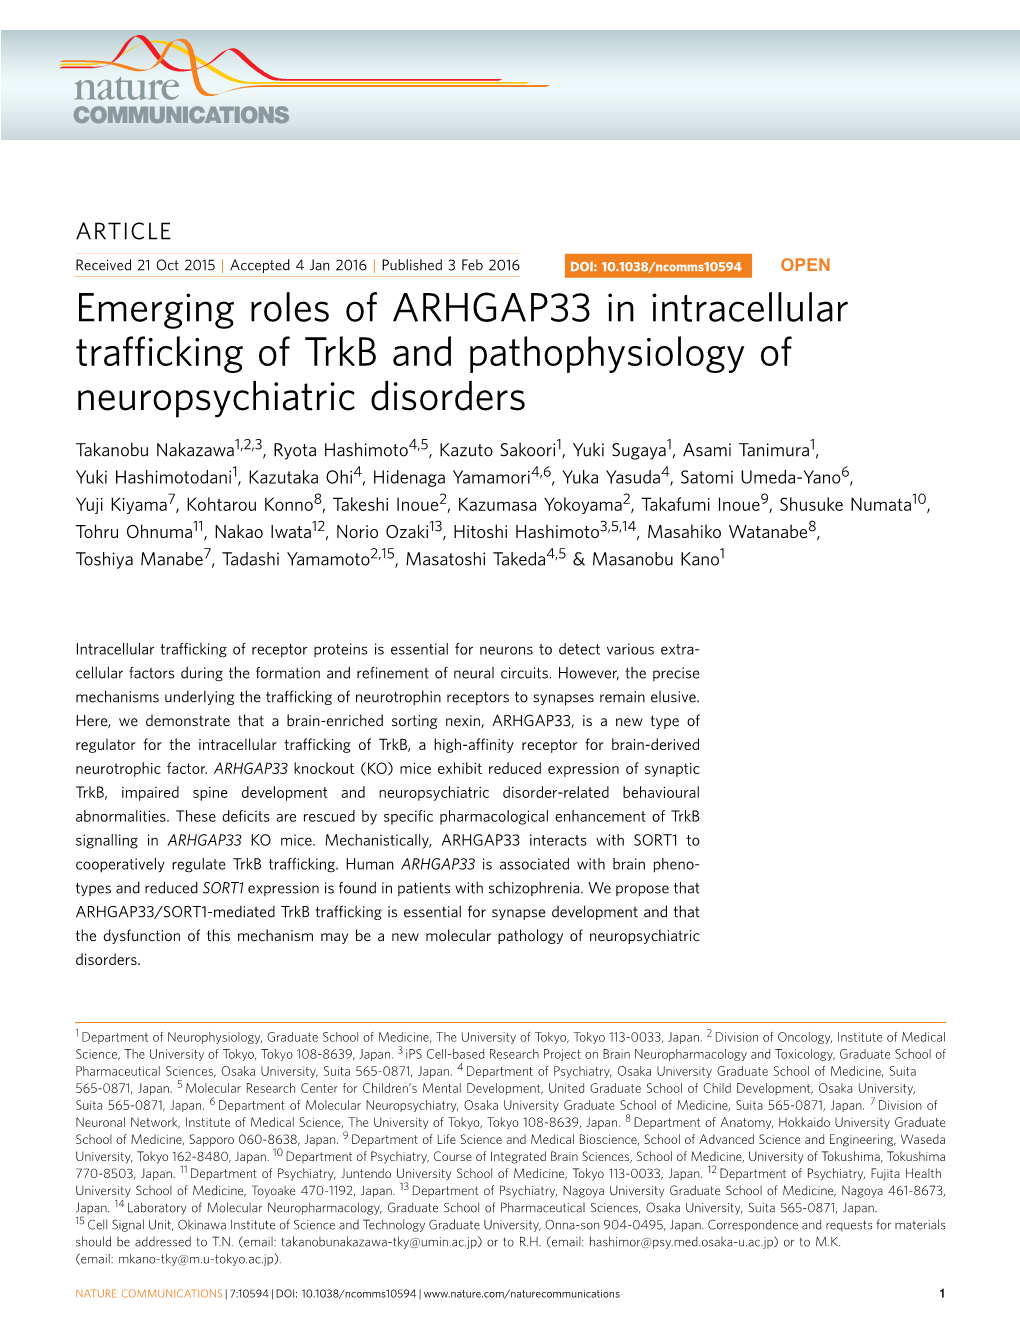 Emerging Roles of ARHGAP33 in Intracellular Trafficking of Trkb And